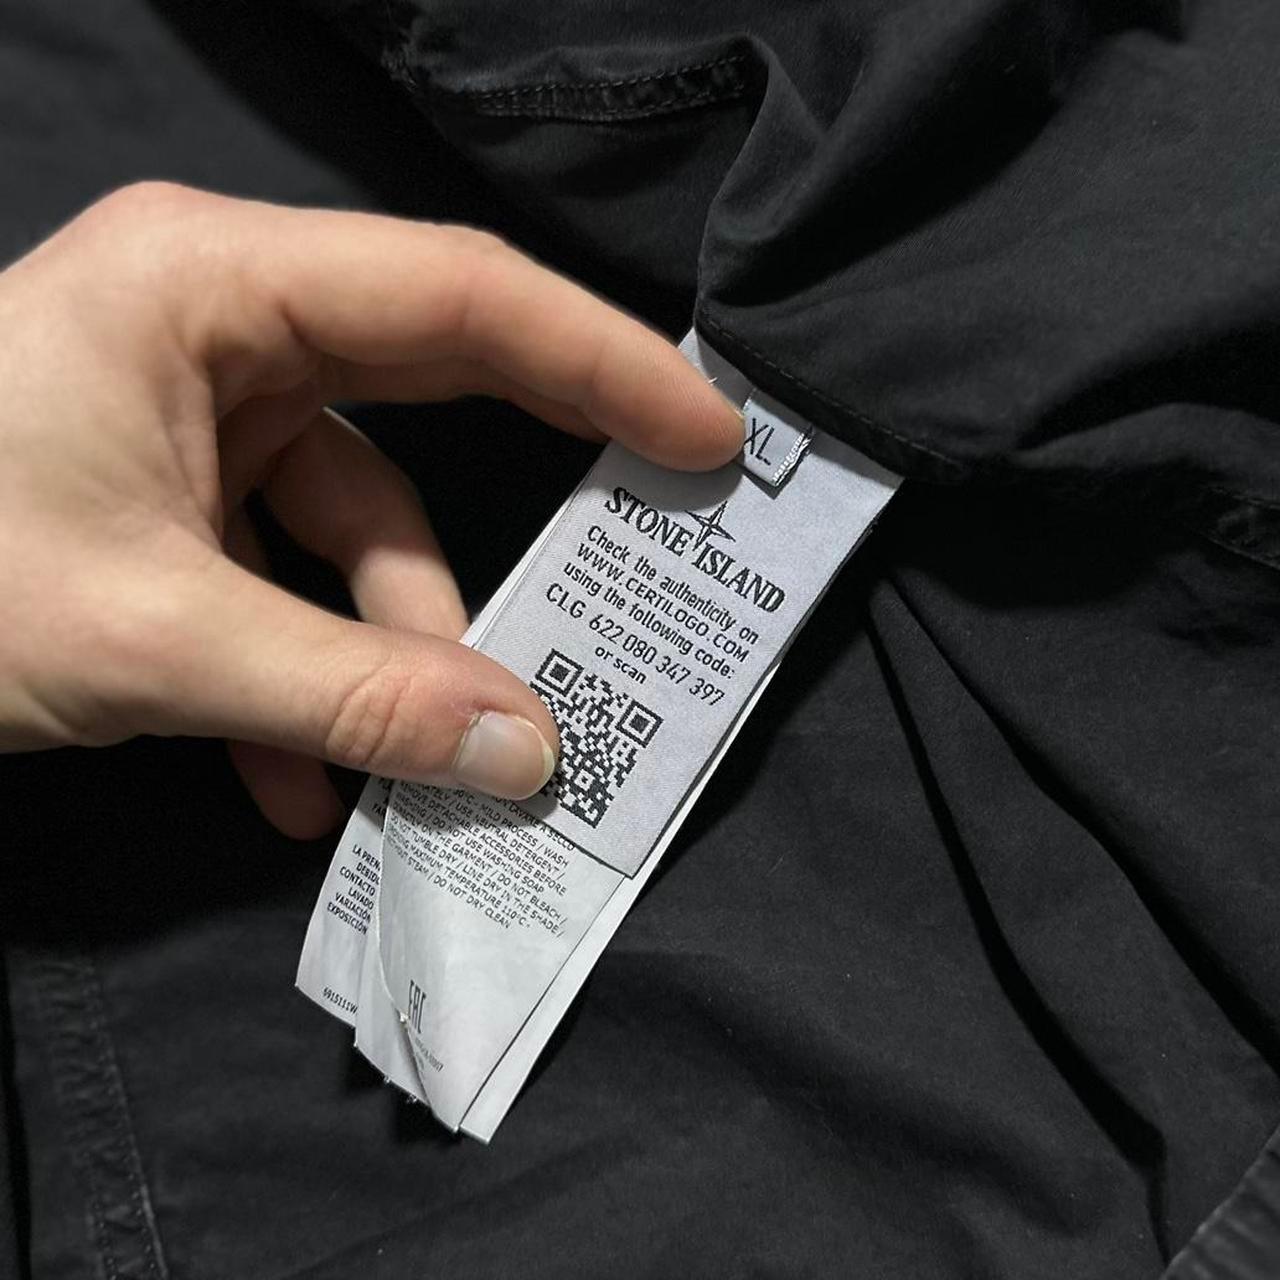 Stone Island Black Canvas Hooded Overshirt - Known Source